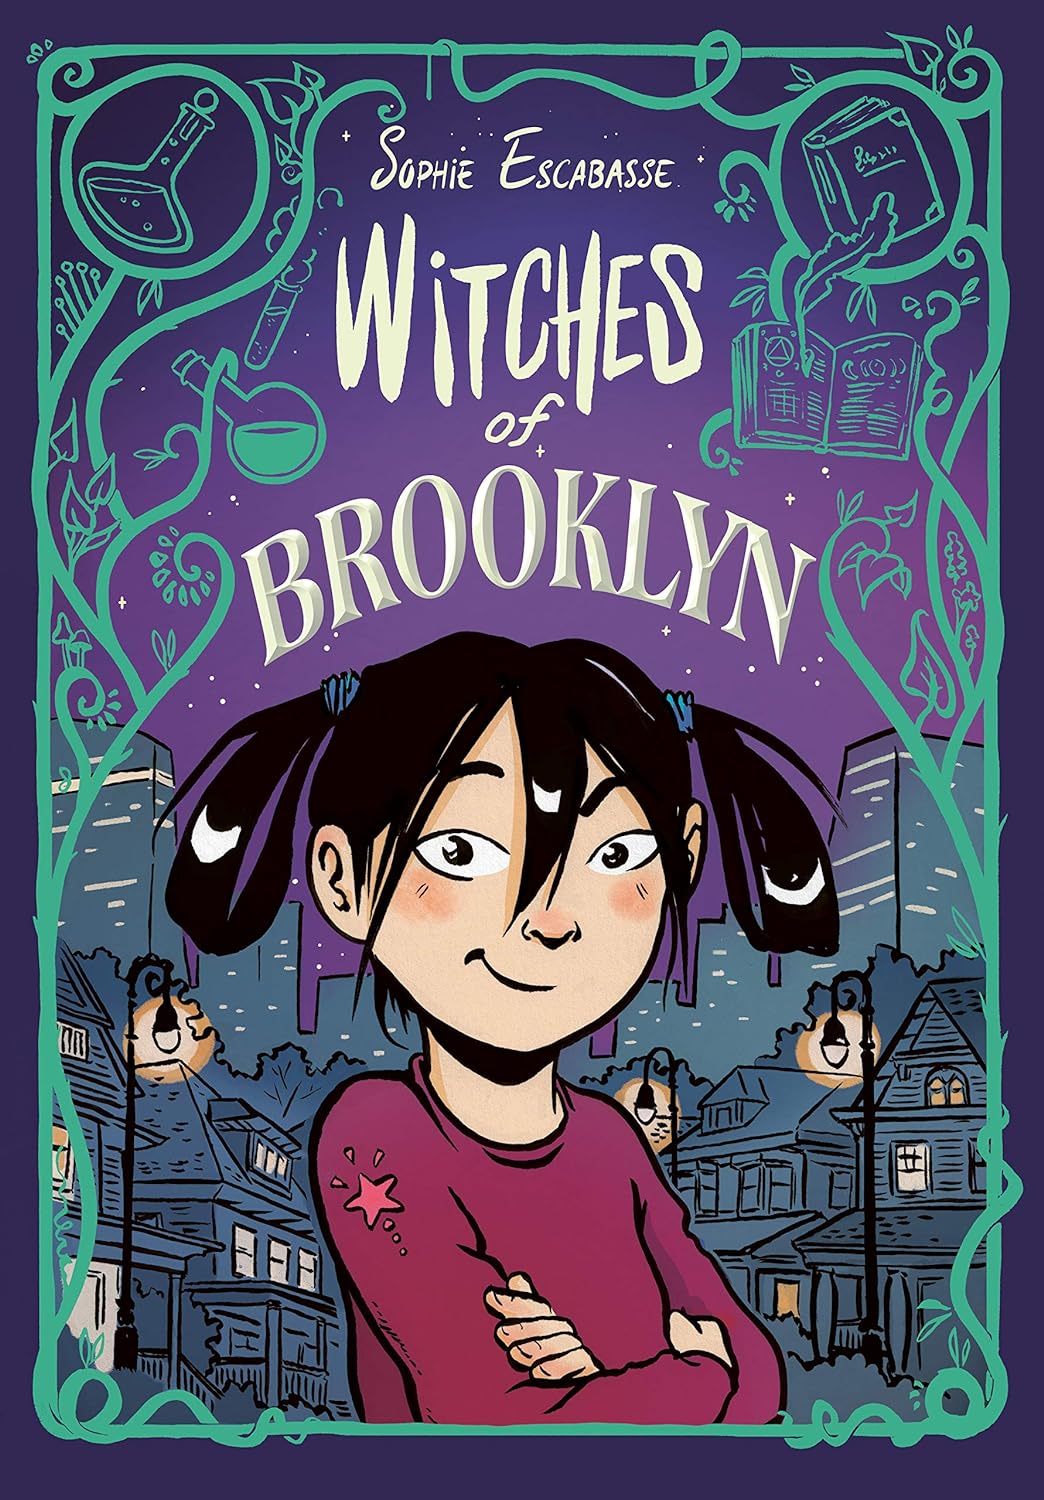 Witches of Brooklyn Book 1 - Parkette.